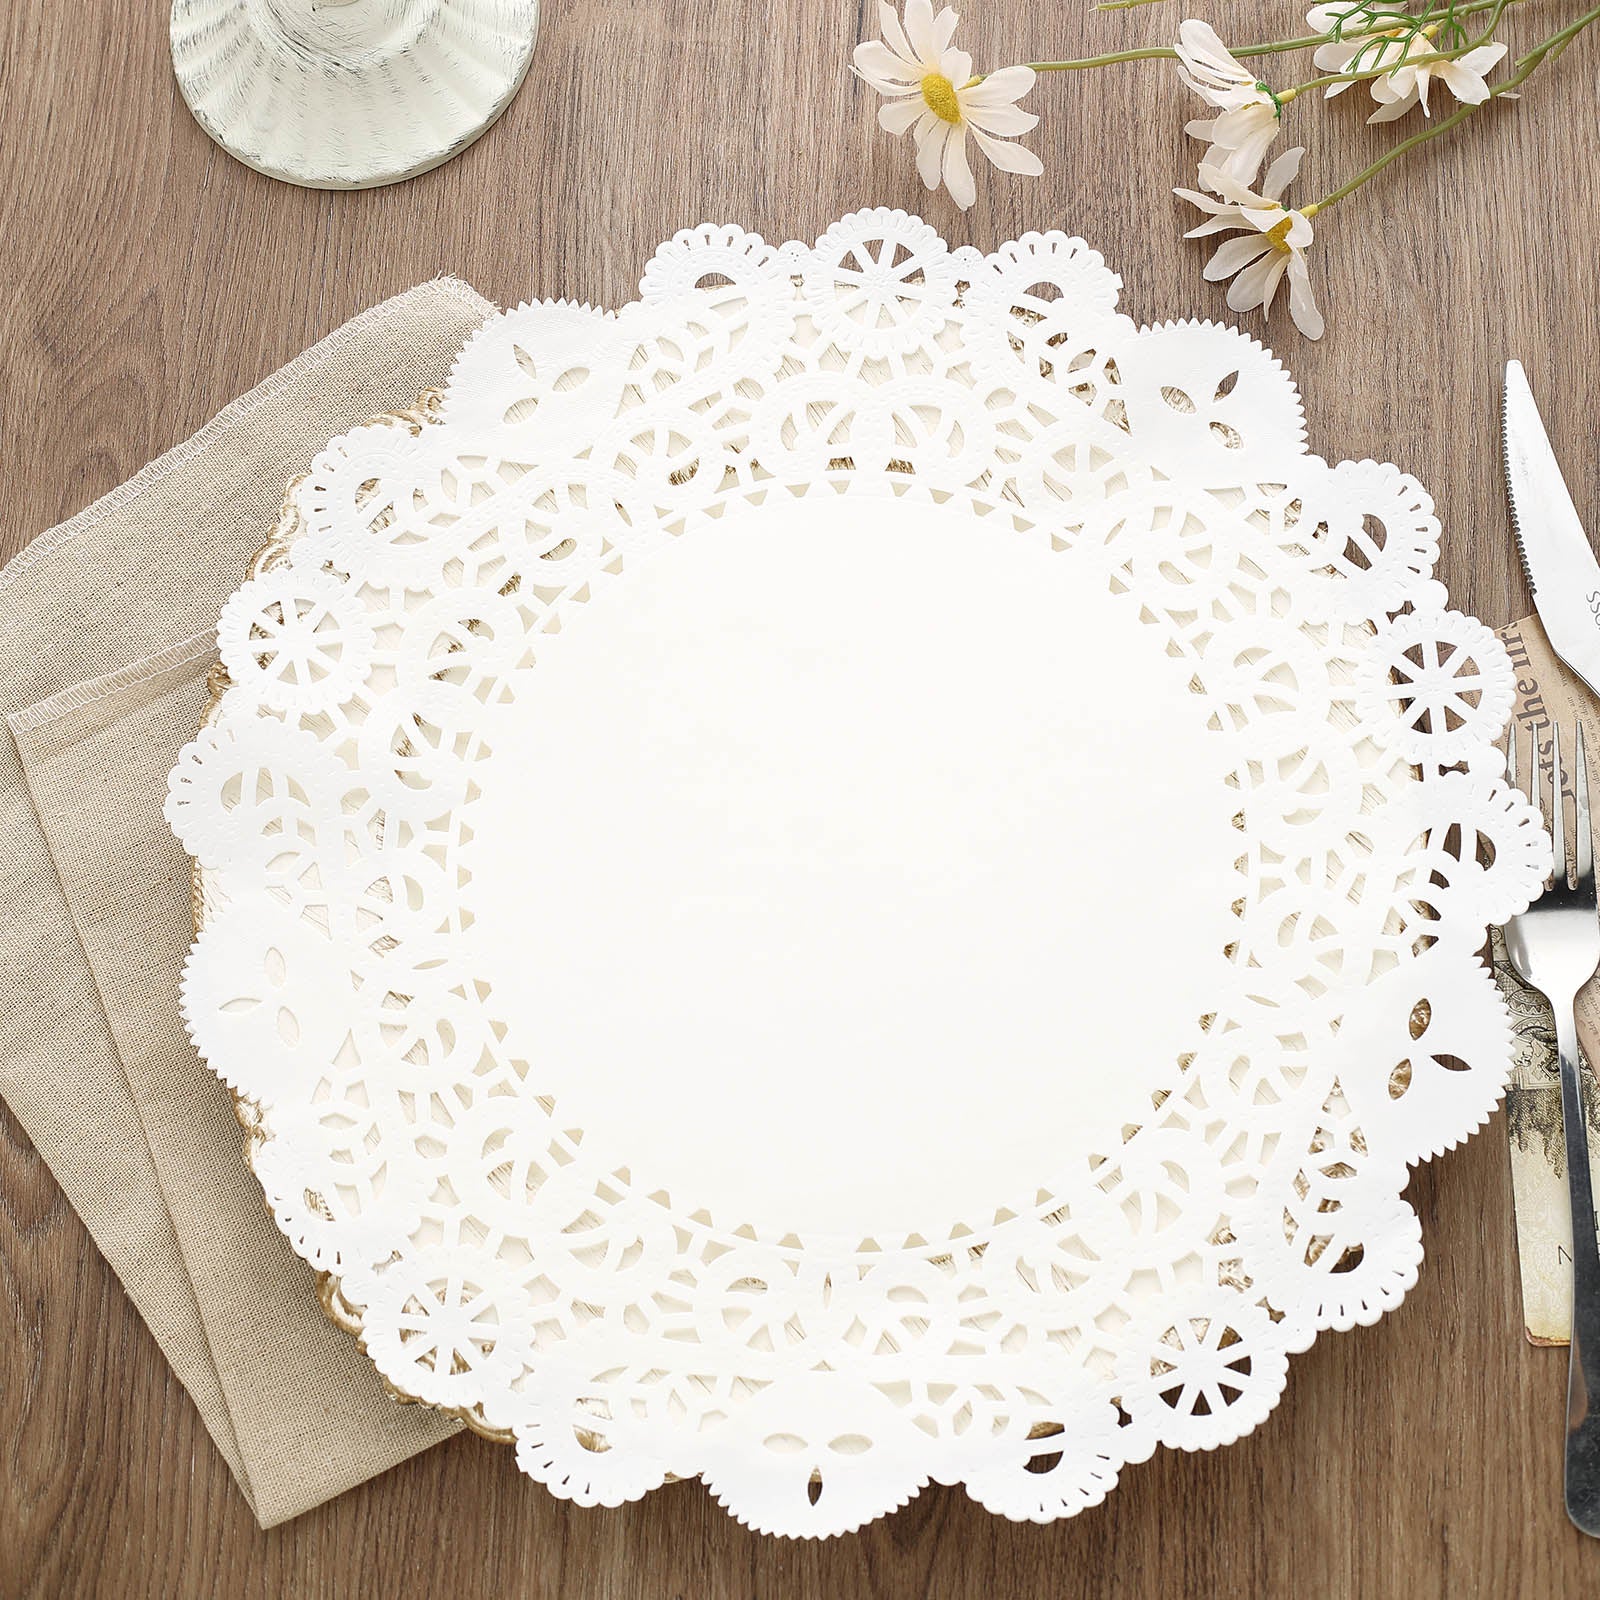 FVIEXE 700PCS Paper Doilies, 5 Assorted Sizes White Lace Doilies for Food  Cake Desert Trays, Crafts, Coffee, Disposable Paper Placemats for Wedding